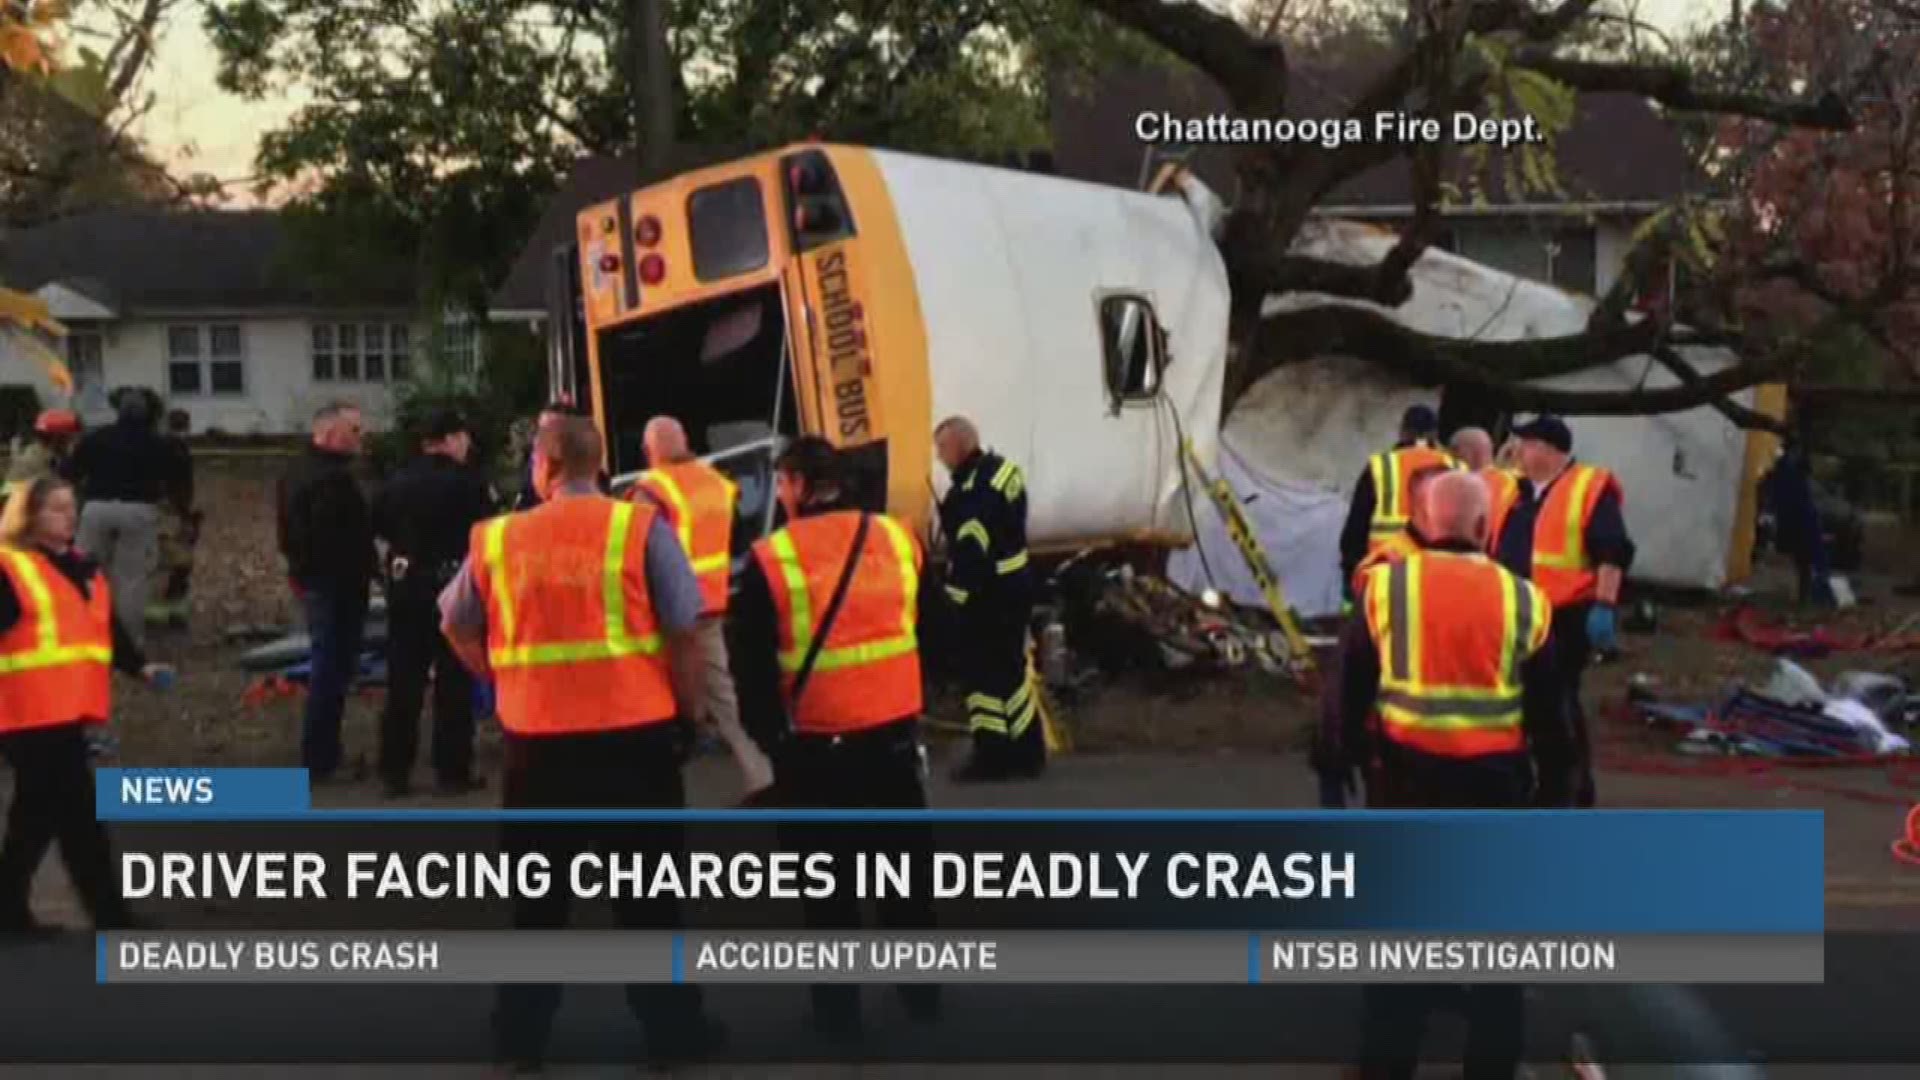 Hamilton County Superintendent Kirk Kelly confirmed Tuesday morning that five students were killed in a school bus crash.